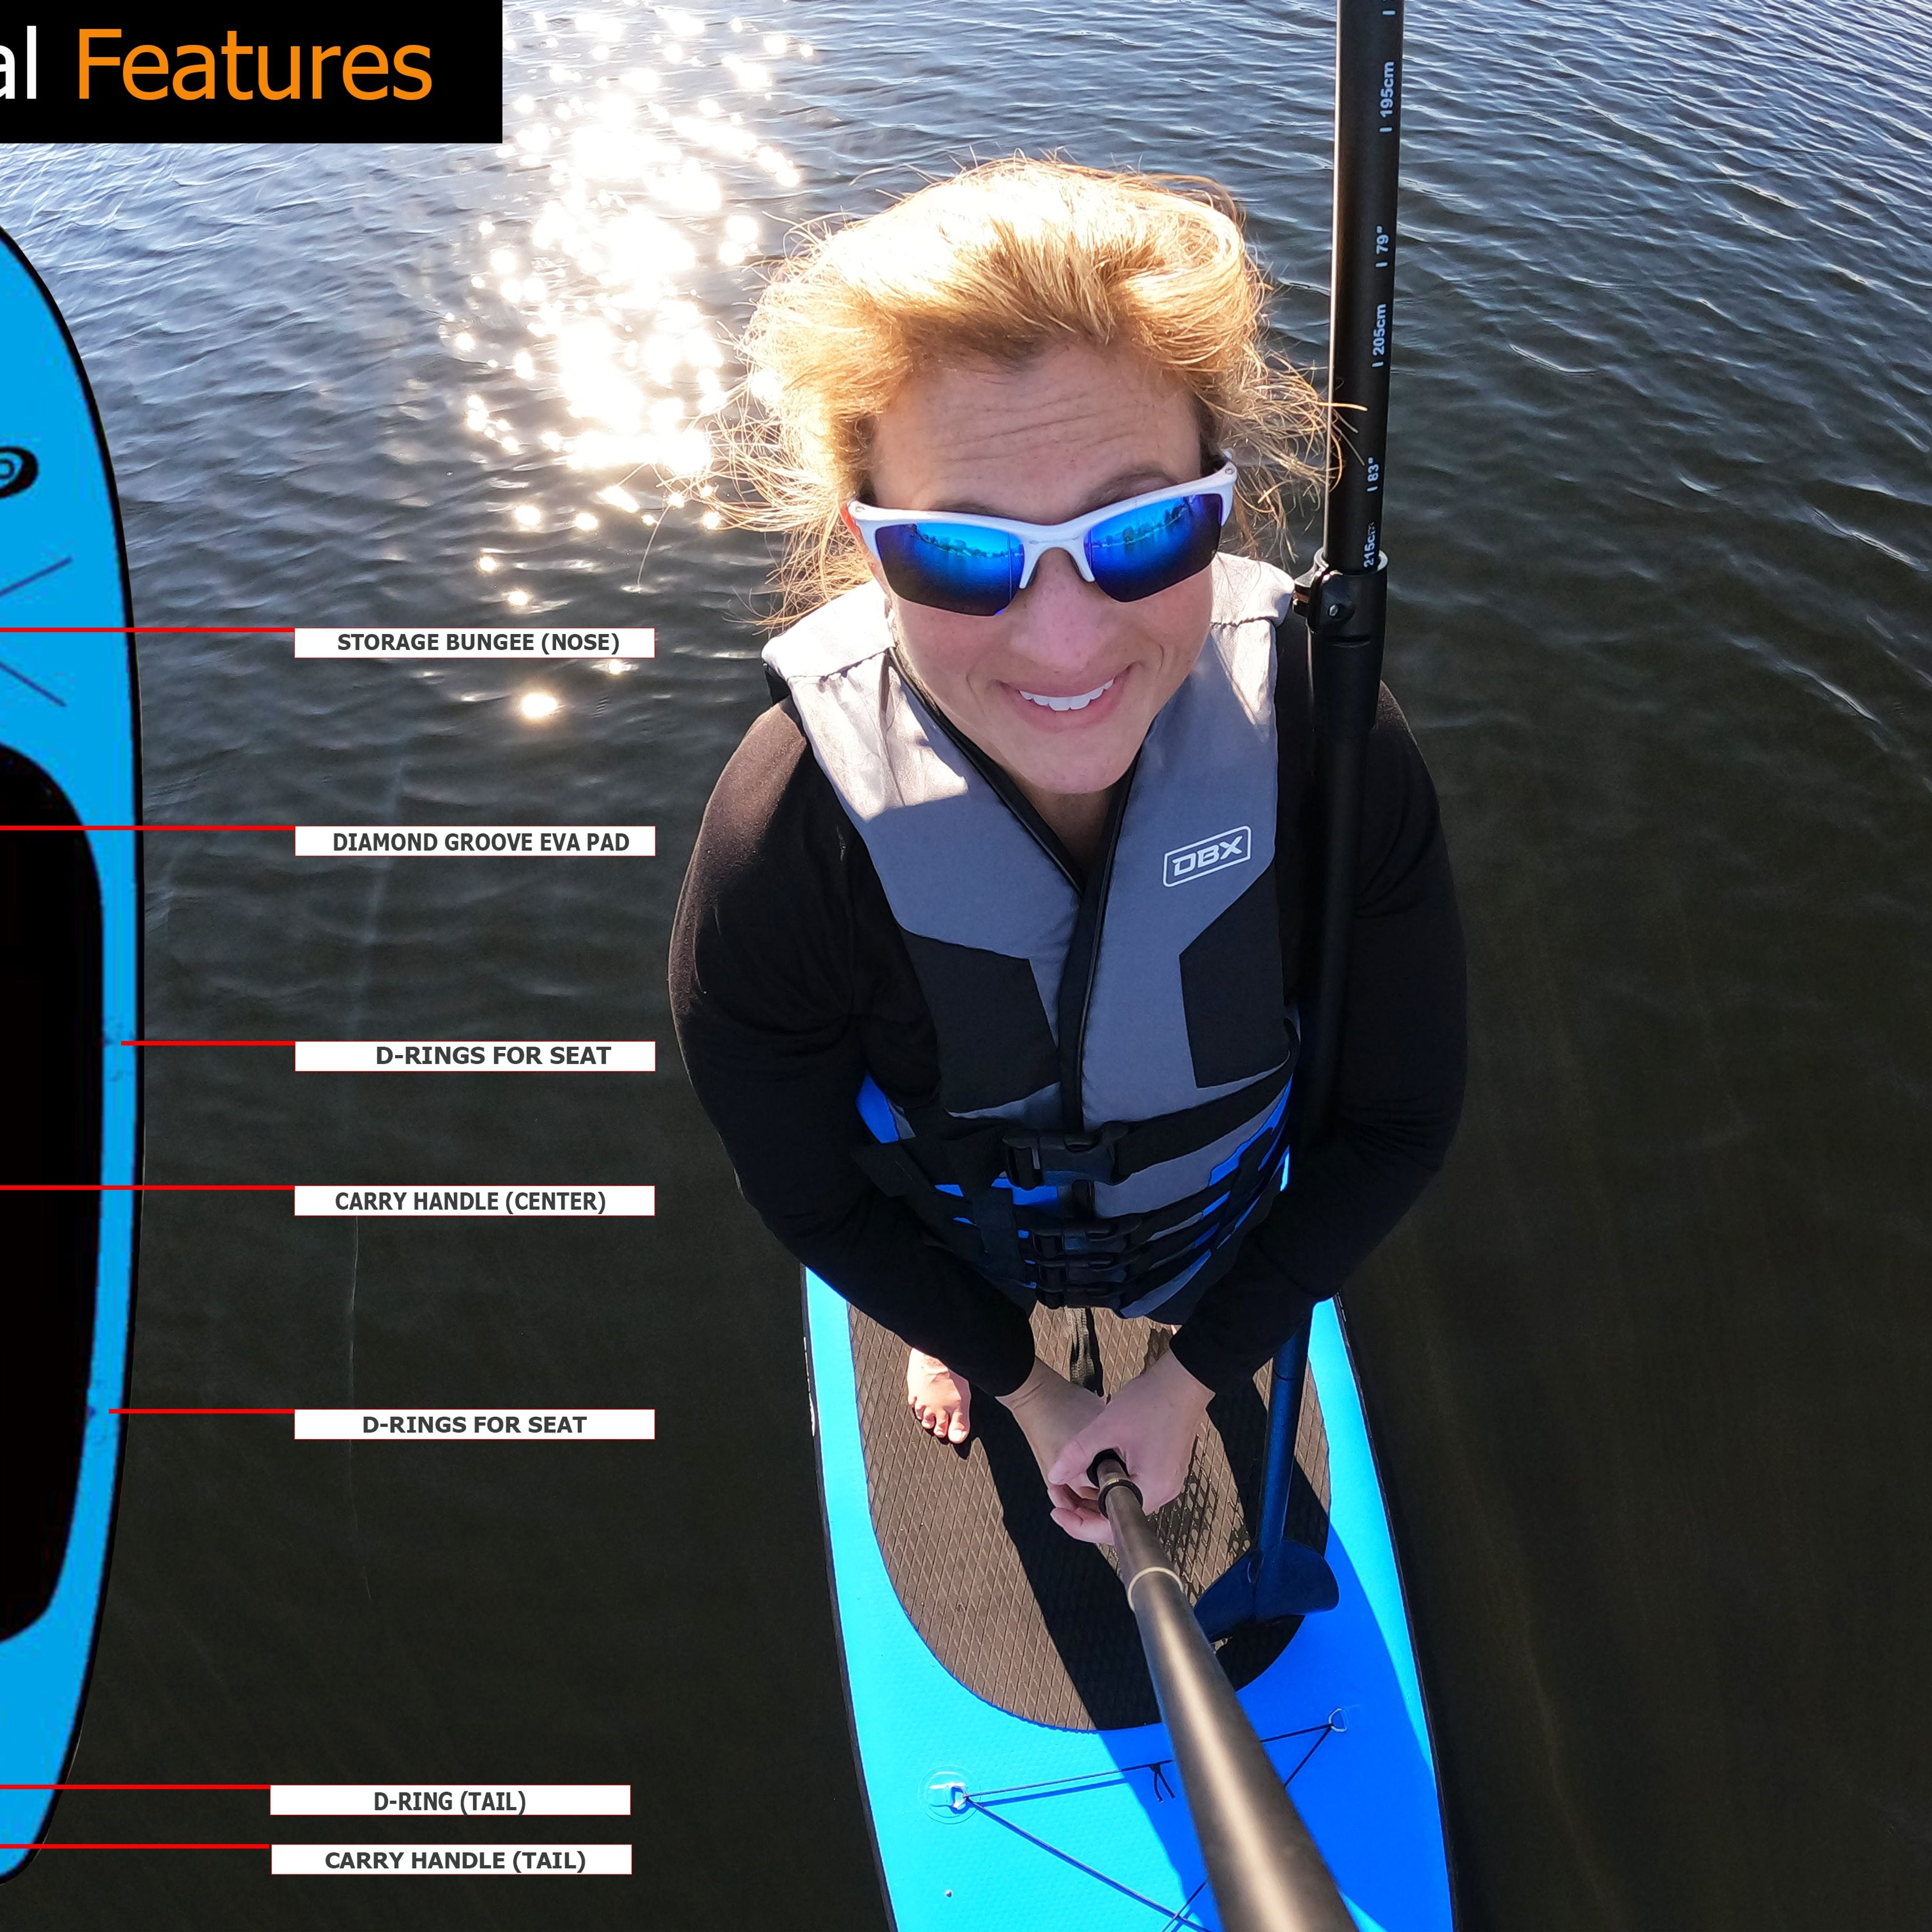 BEYOND JLF 10FT+6IN Inflatable Stand Up Paddle Board Set